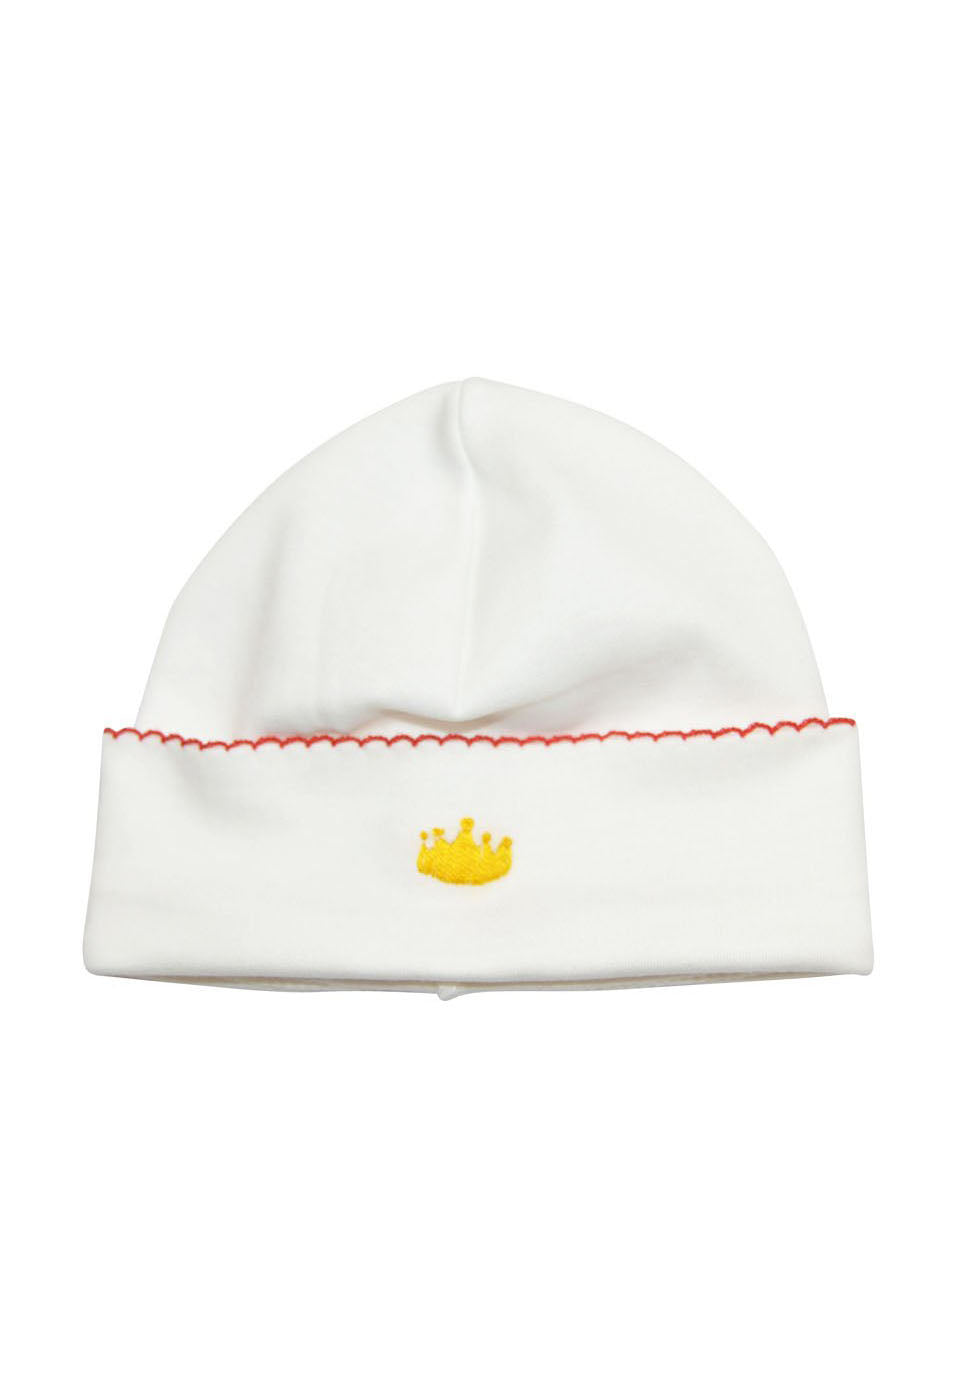 Baby Girl's Christmas Gold Crown Hat - Little Threads Inc. Children's Clothing